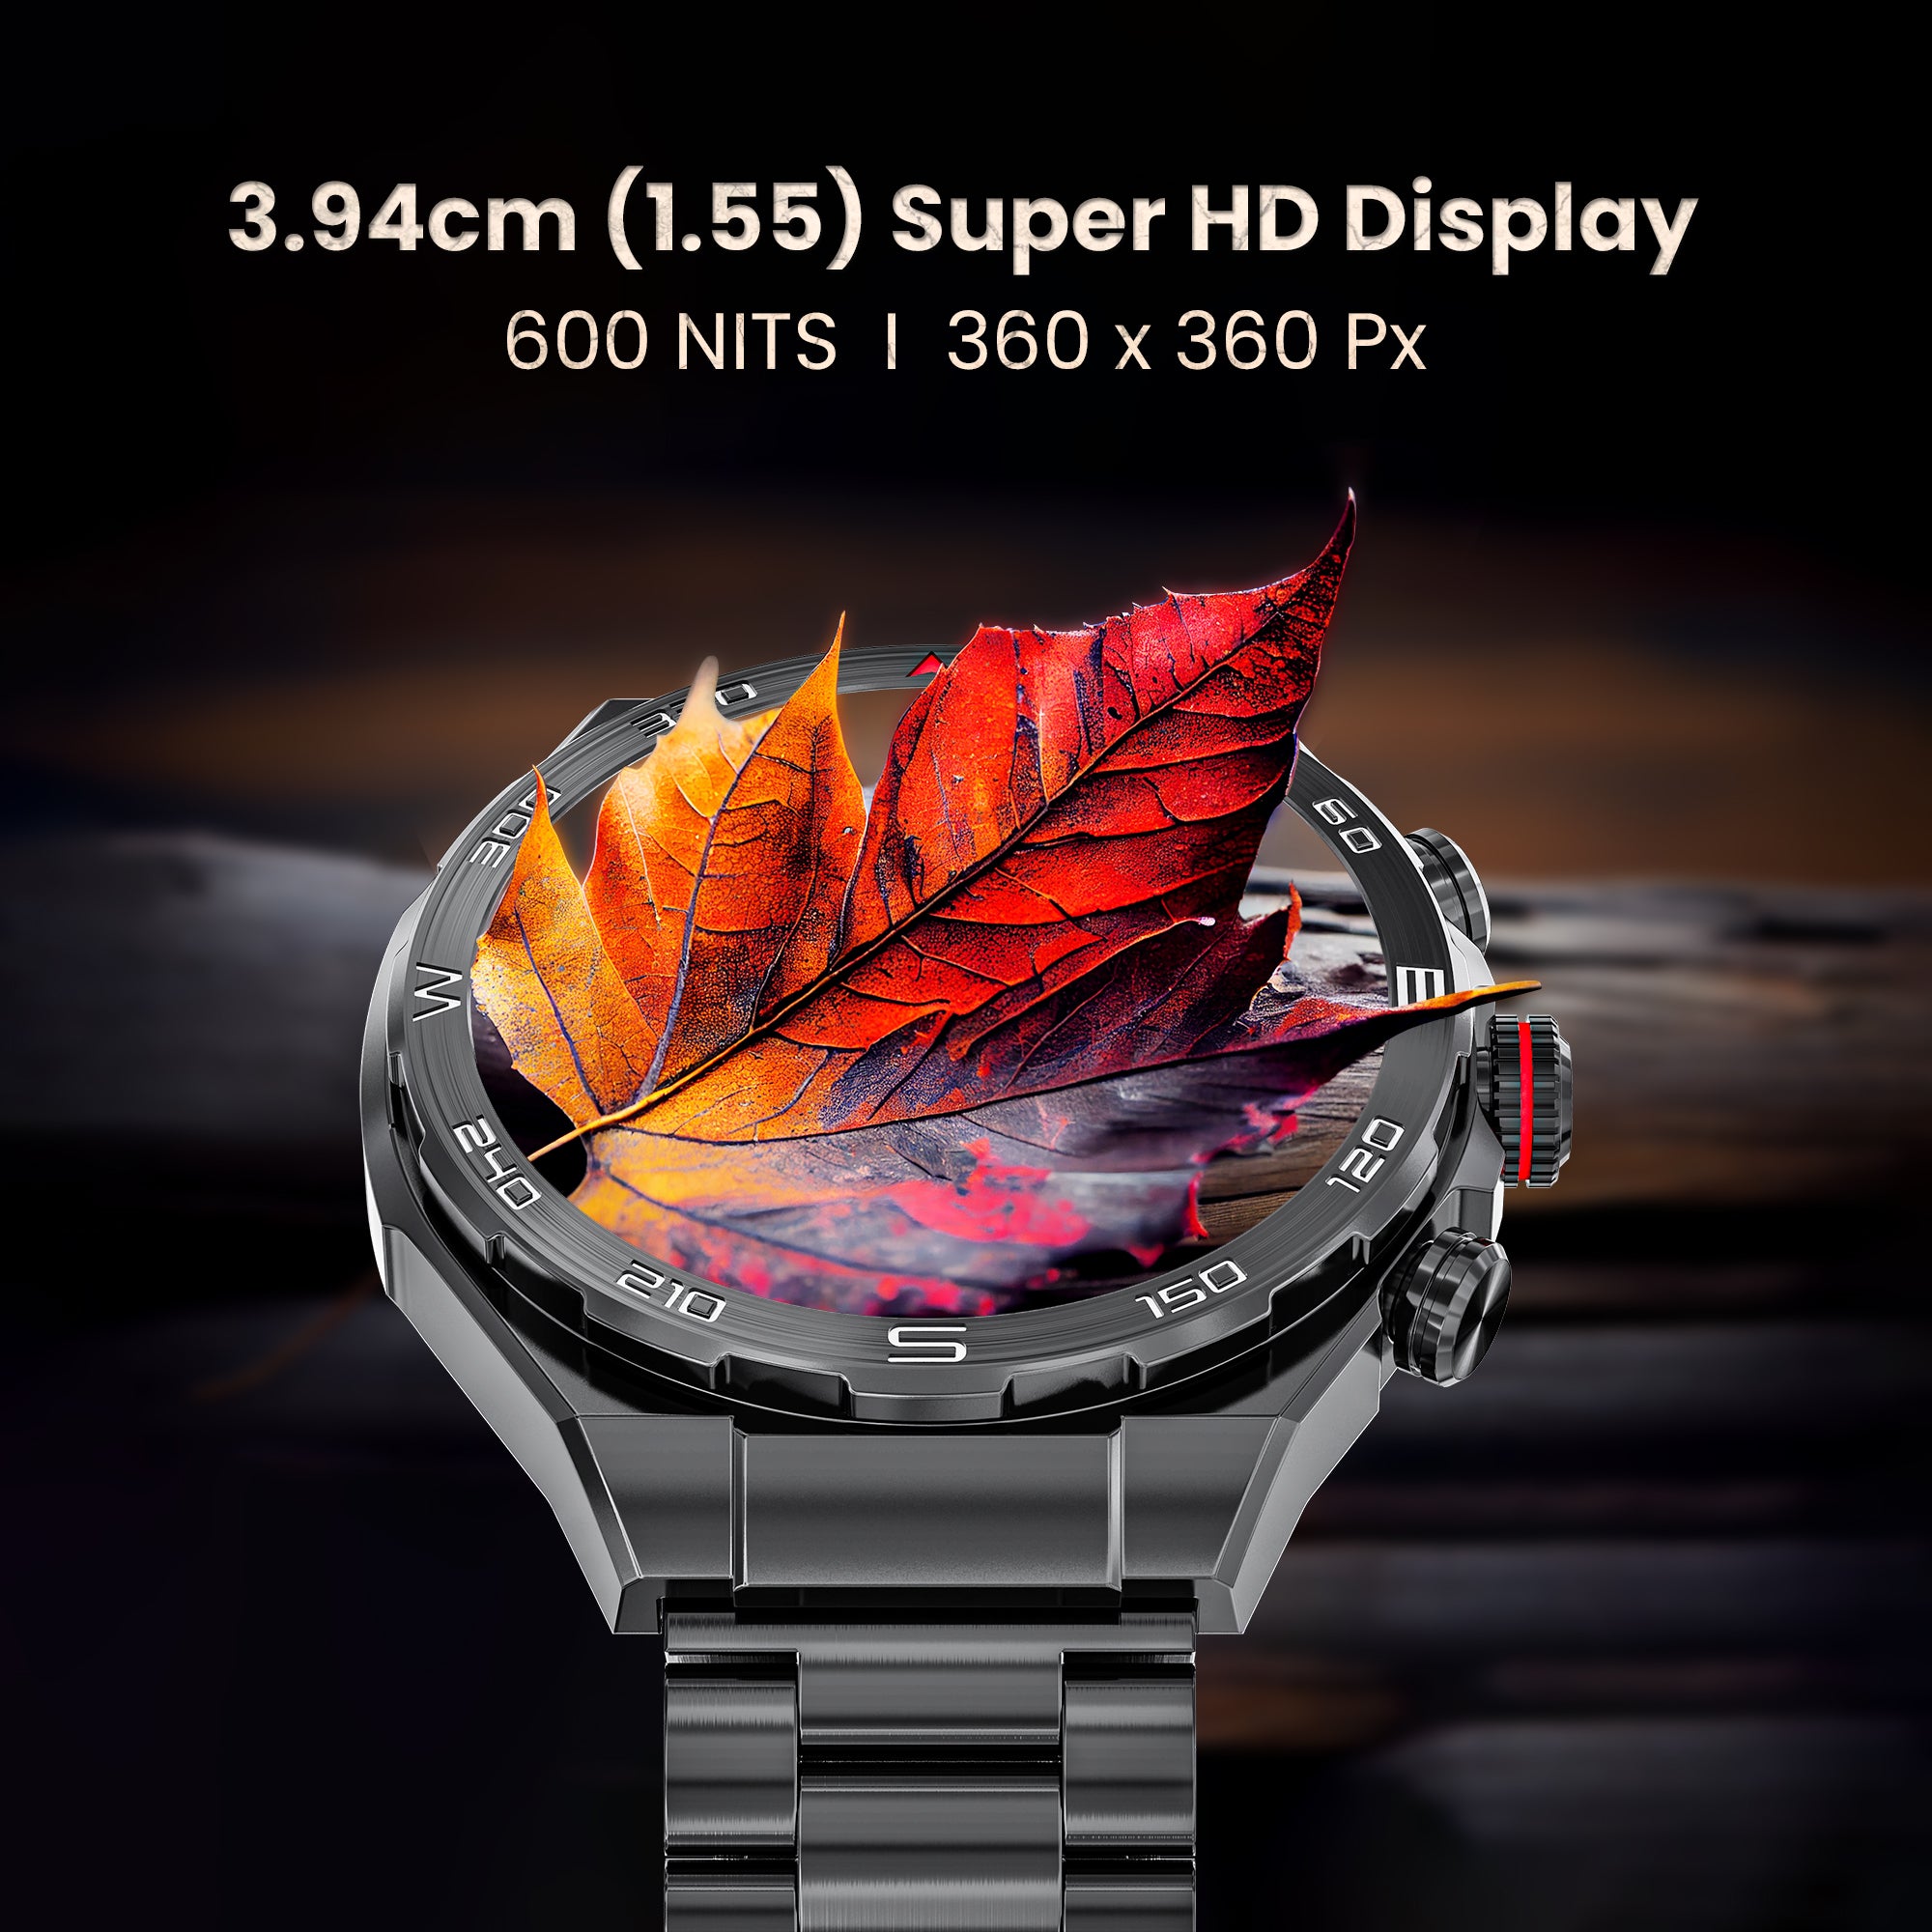 GIZMORE IKON Luxe 3.93cm (1.55) FHD Display | AOD with 600 NITS I Active Crown & 3 Buttons Control | IP68 | Zinc Alloy Metal Body | 15 Days Battery & 120 Sport Modes I BT Calling Smartwatch